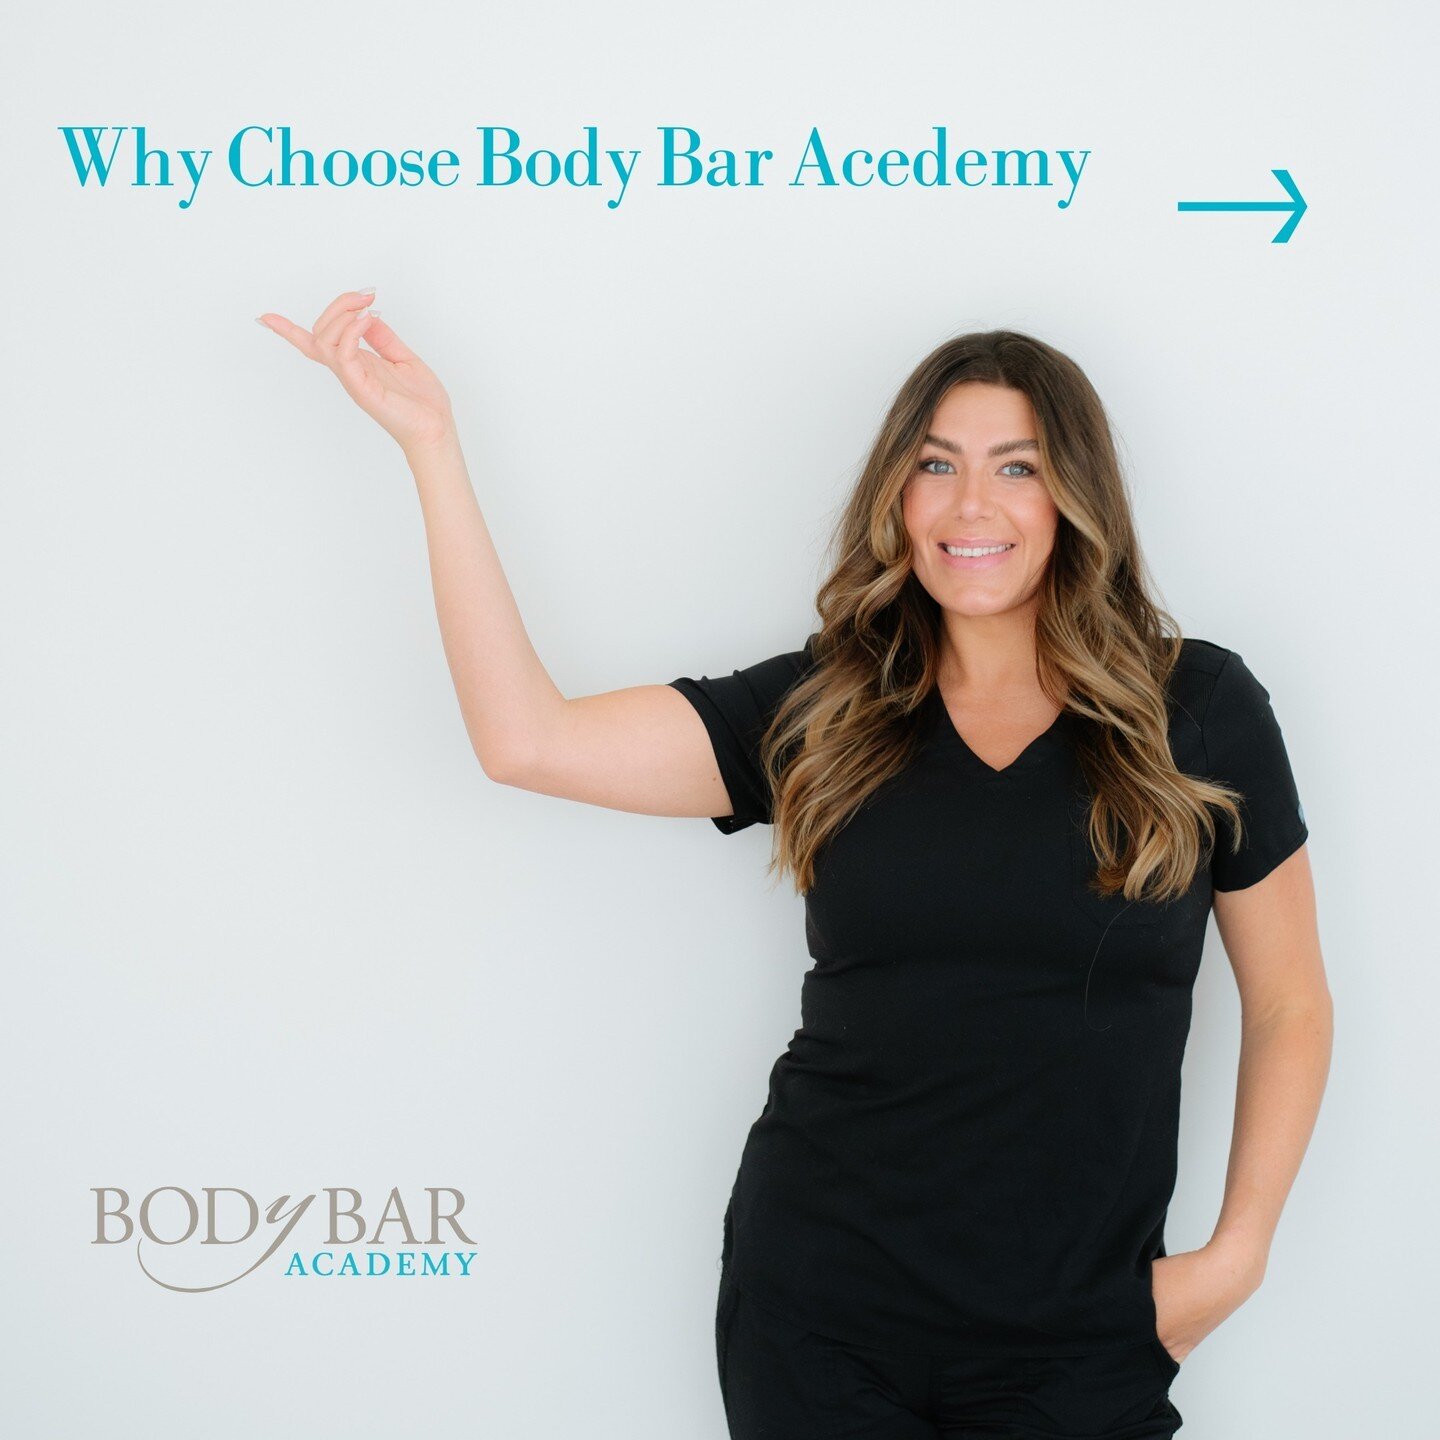 Body Bar Laser Academy is renowned as a premier institution for aspiring laser technicians! ⁠
⁠
Our training program offers a seamless integration of thorough classroom theory and hands-on laser experience, guaranteeing proficiency in both knowledge 